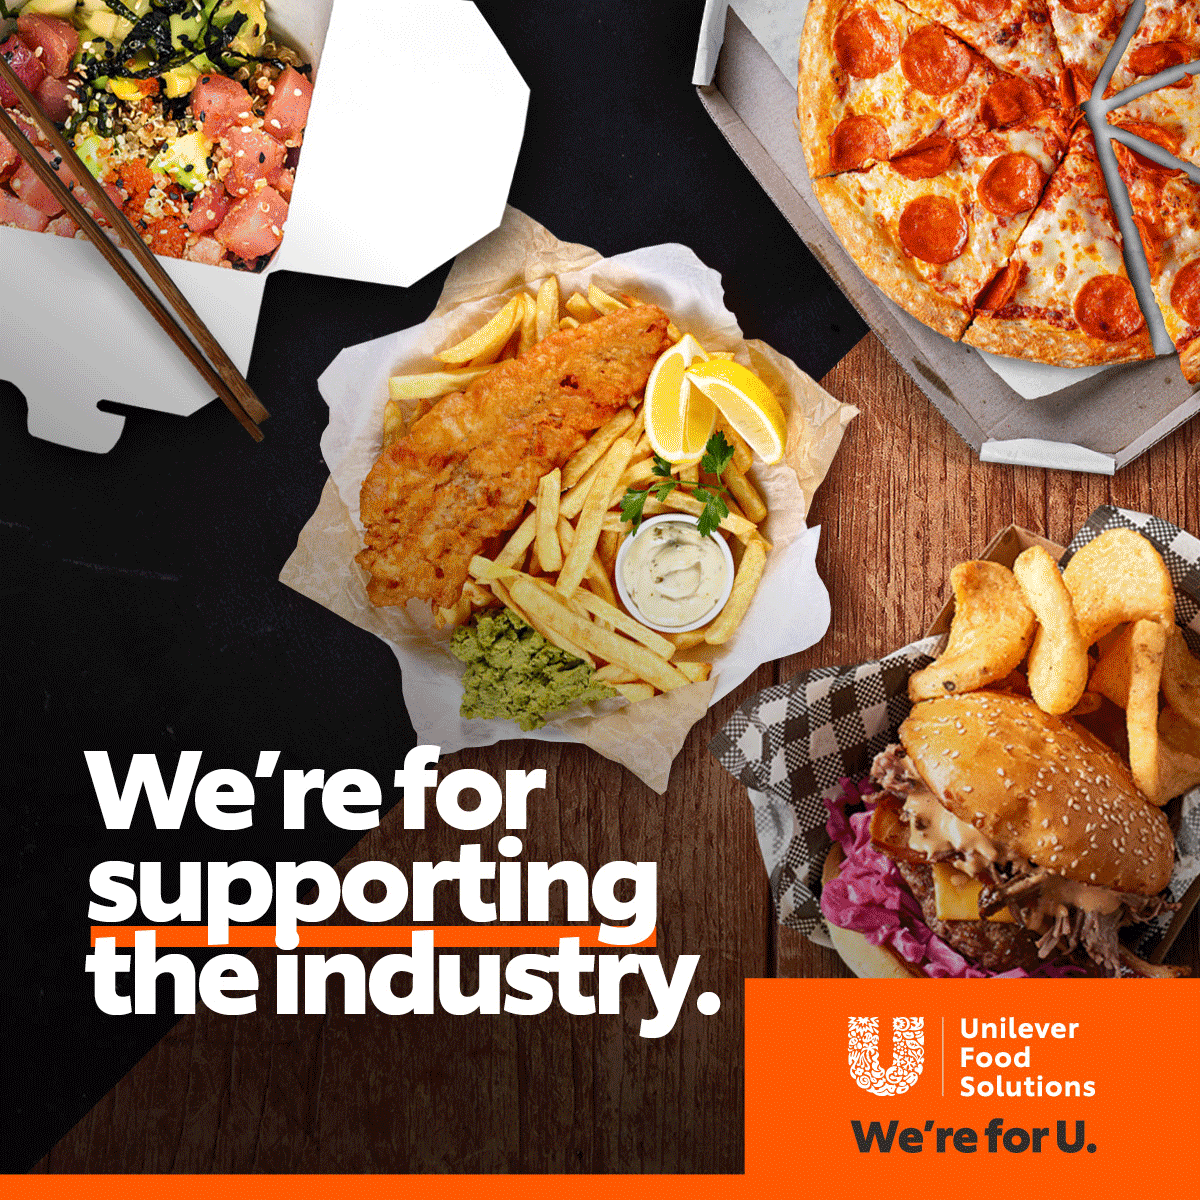 Unilever Food Solutions - We're for supporting the industry